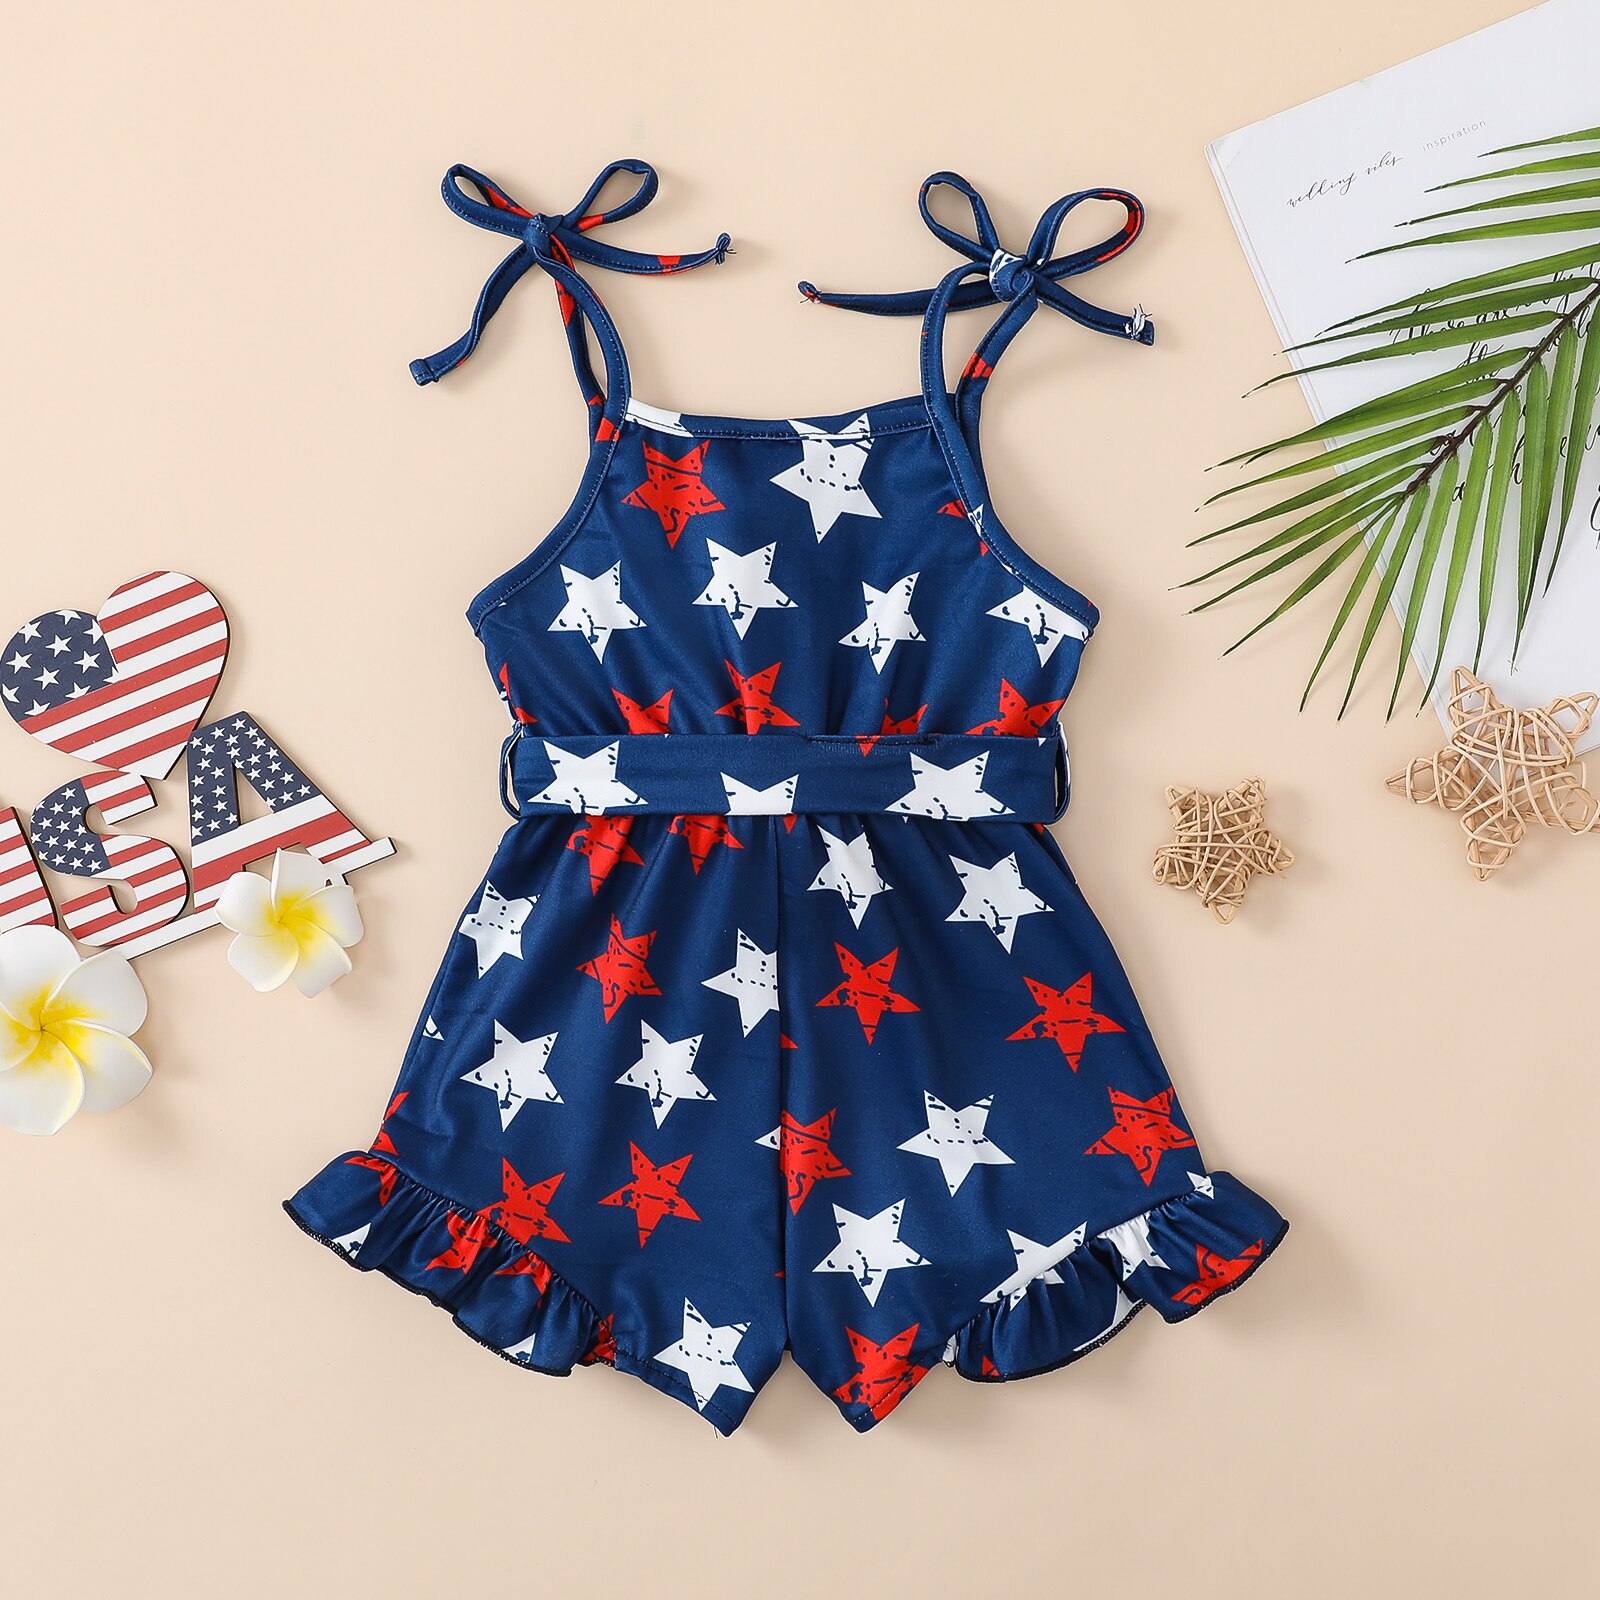 Citgeett-Summer-Independence-Day-Kids-Girl-Jumpsuit-Shorts-Star-Print-Sleeveless-Rompers-Playsuit-Belt-Clothes-1